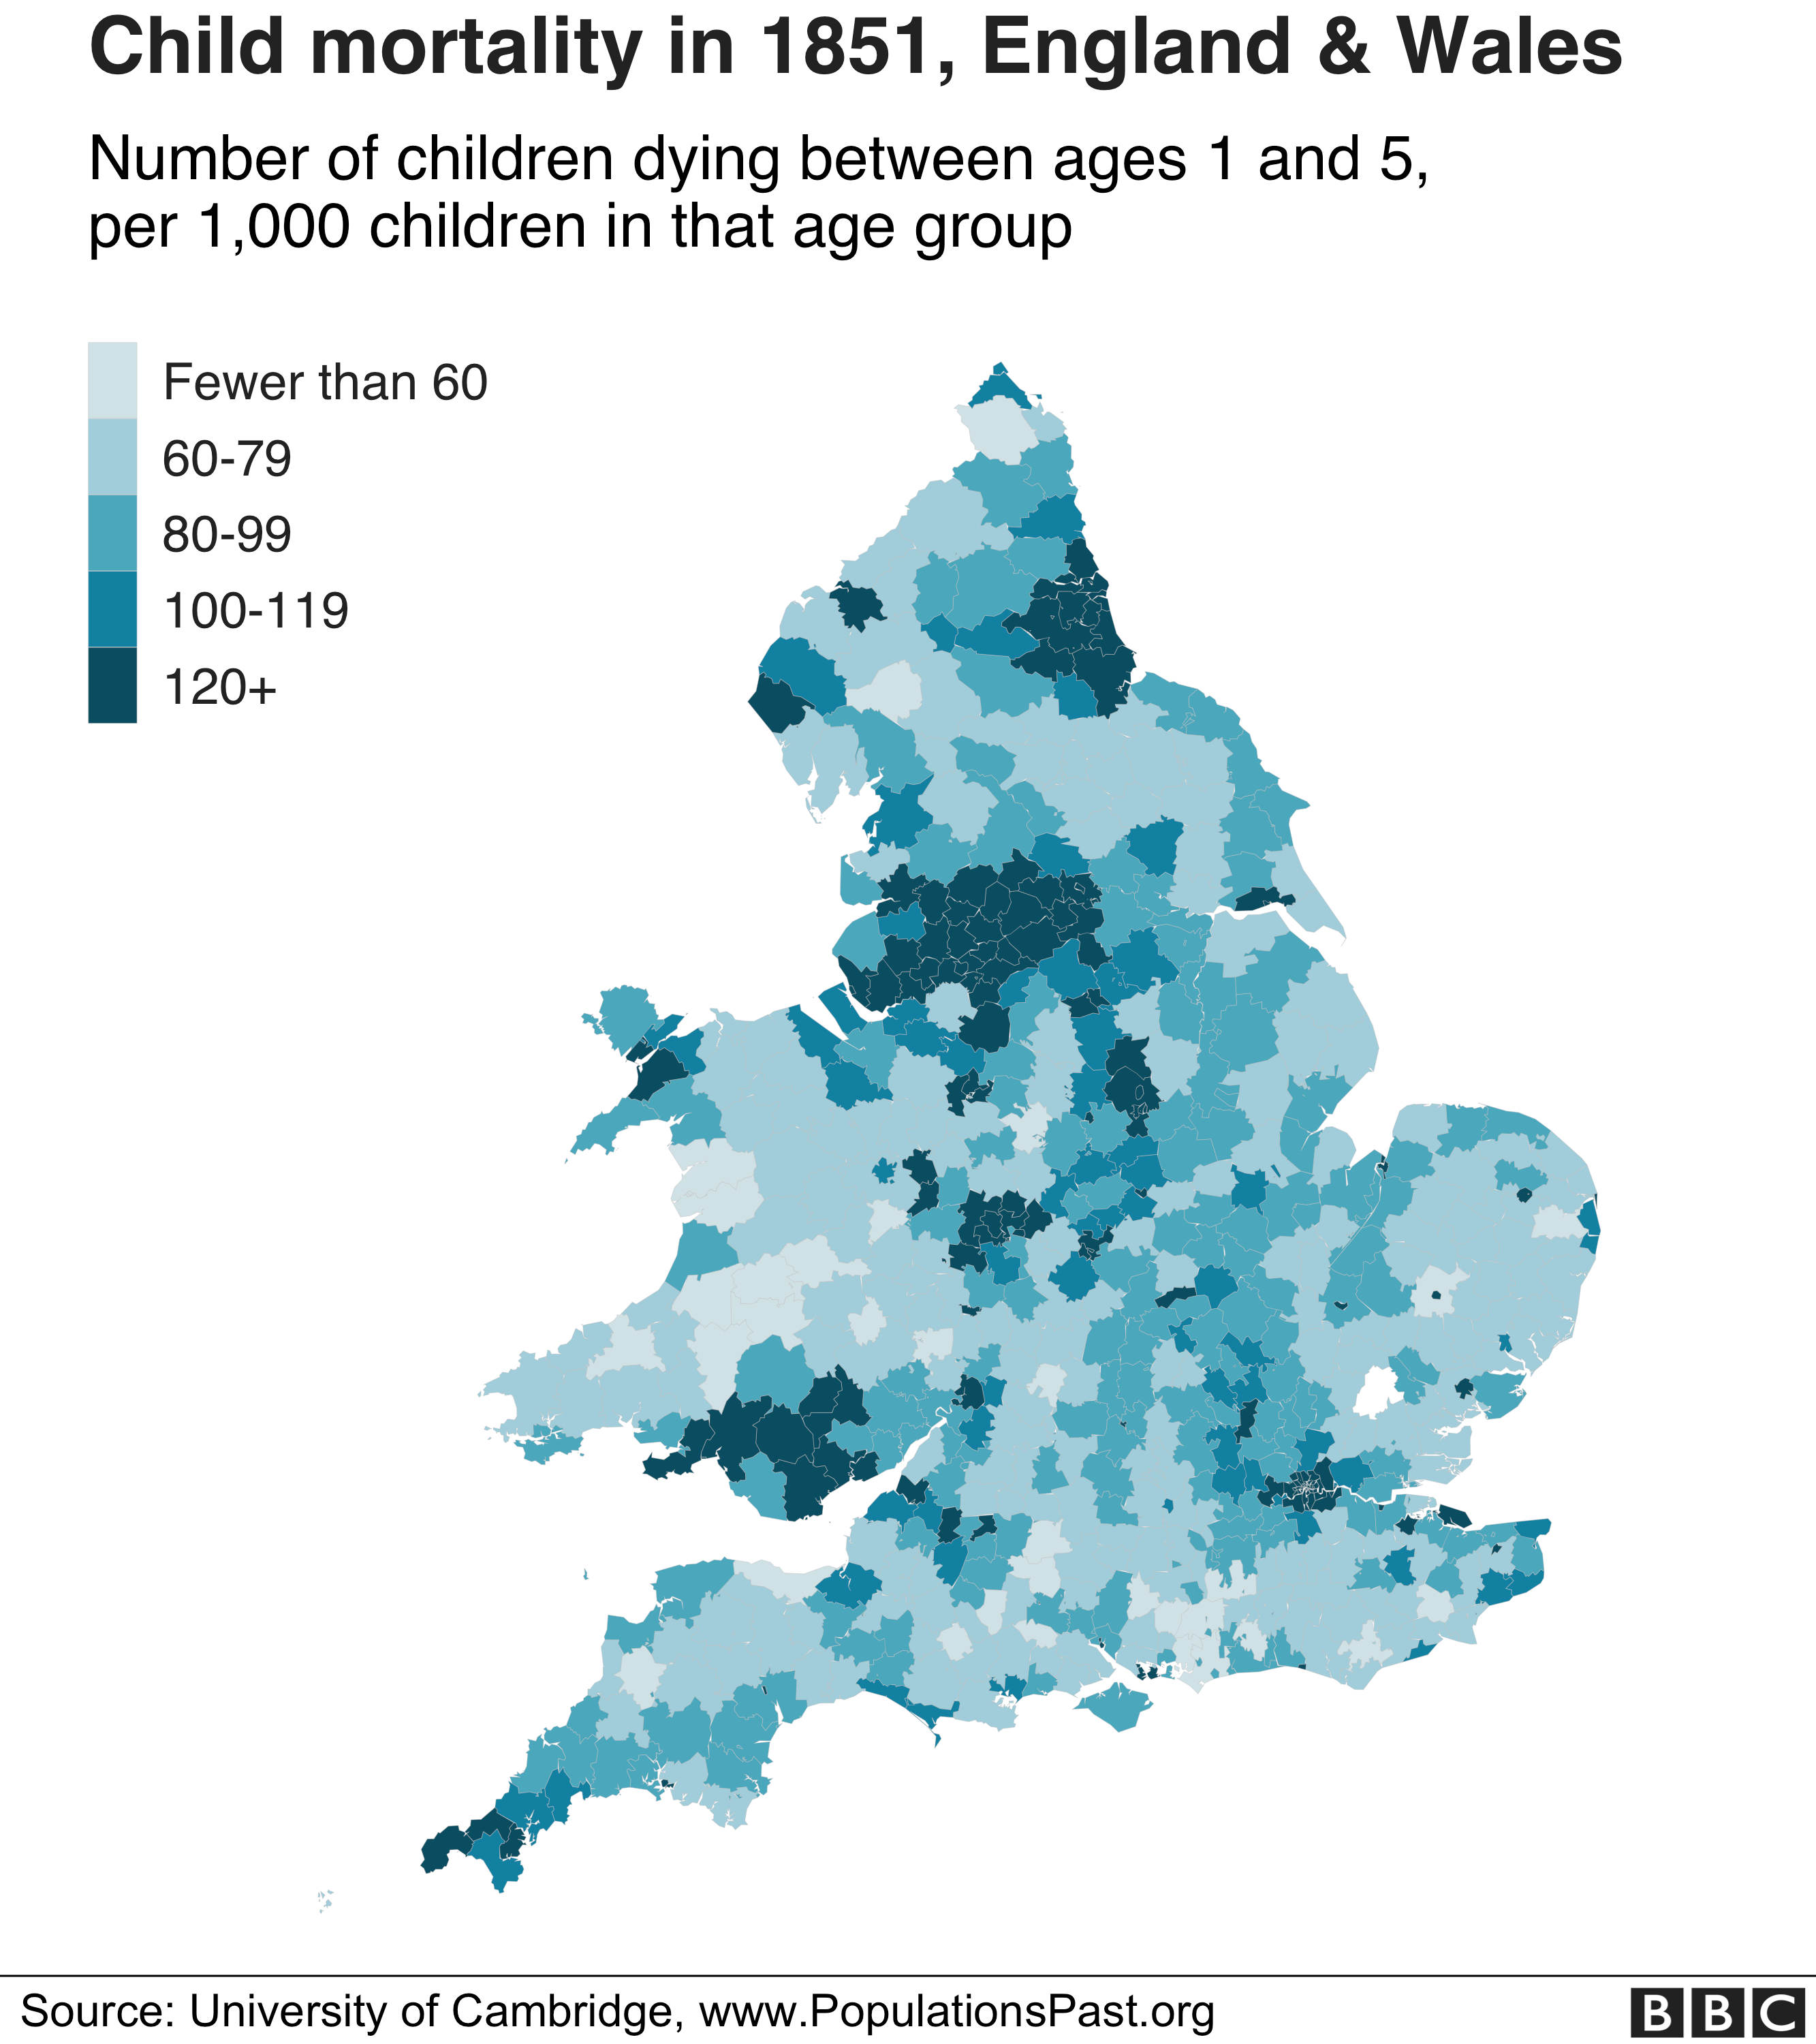 Child mortality in 1851 in England and Wales